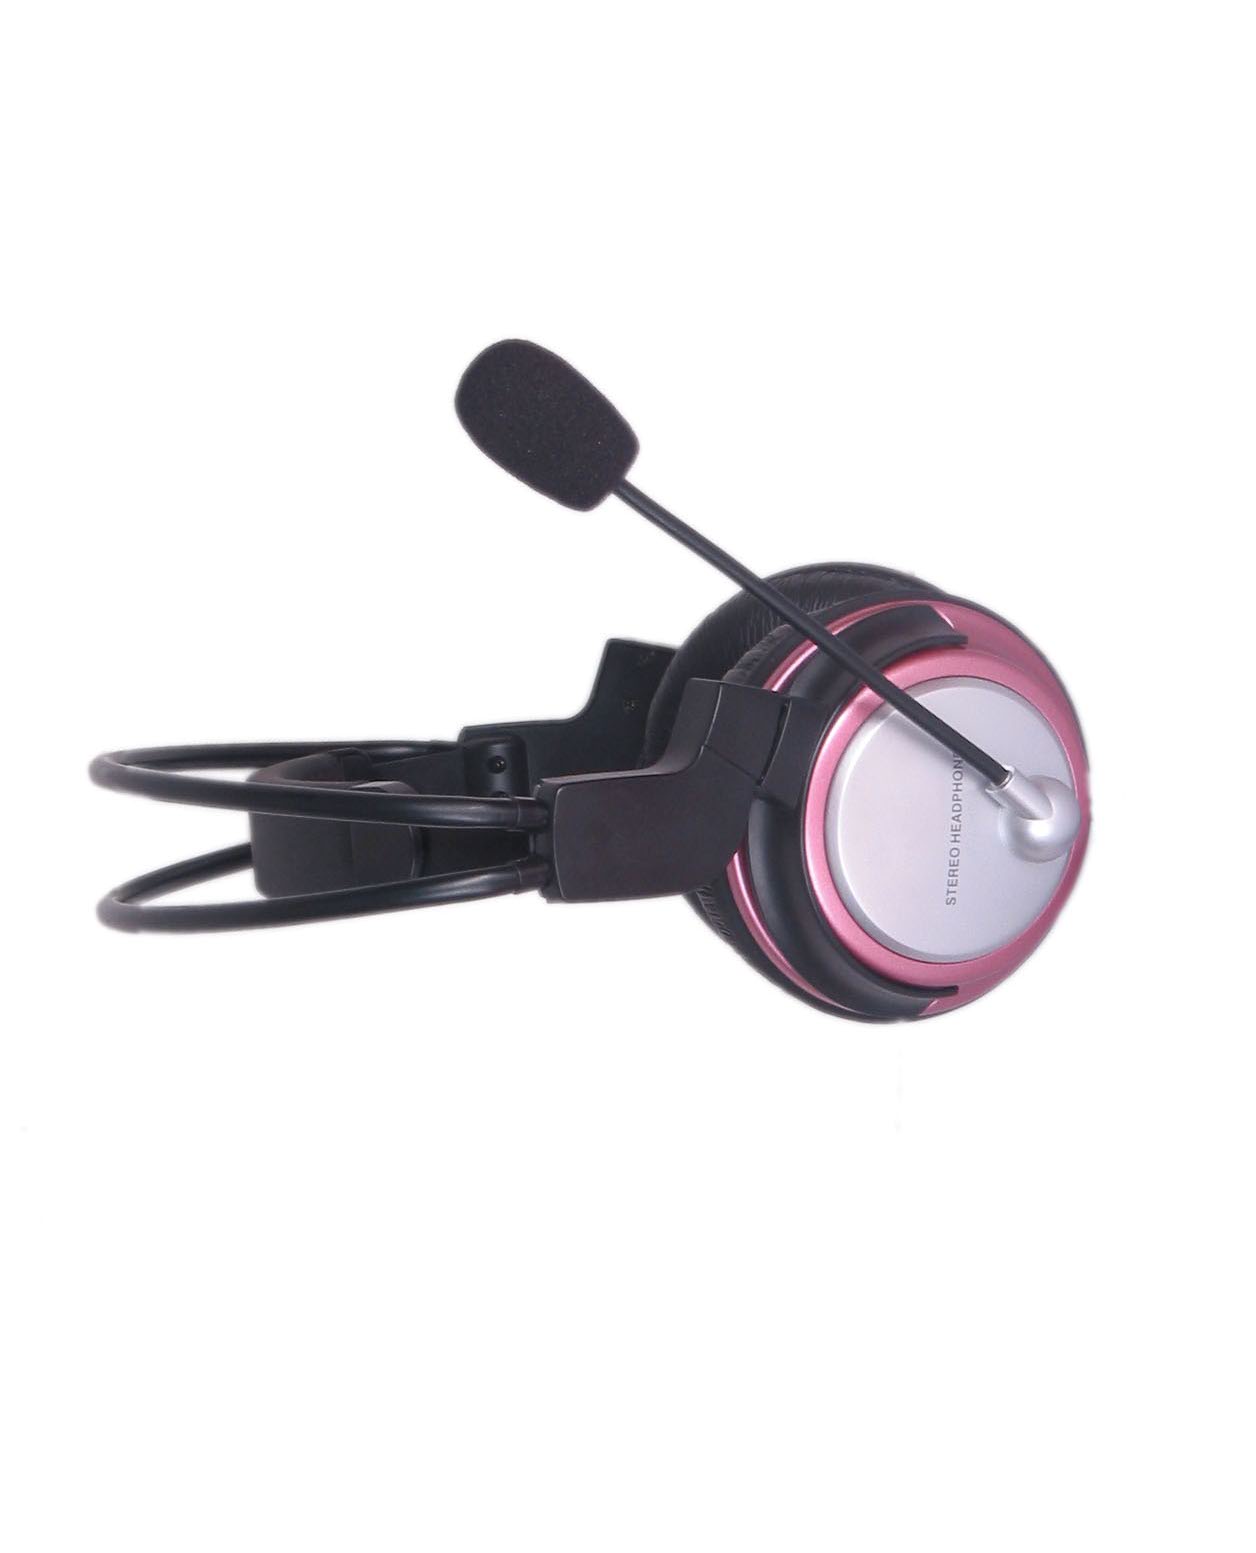 2.4G wireless headset with microphone